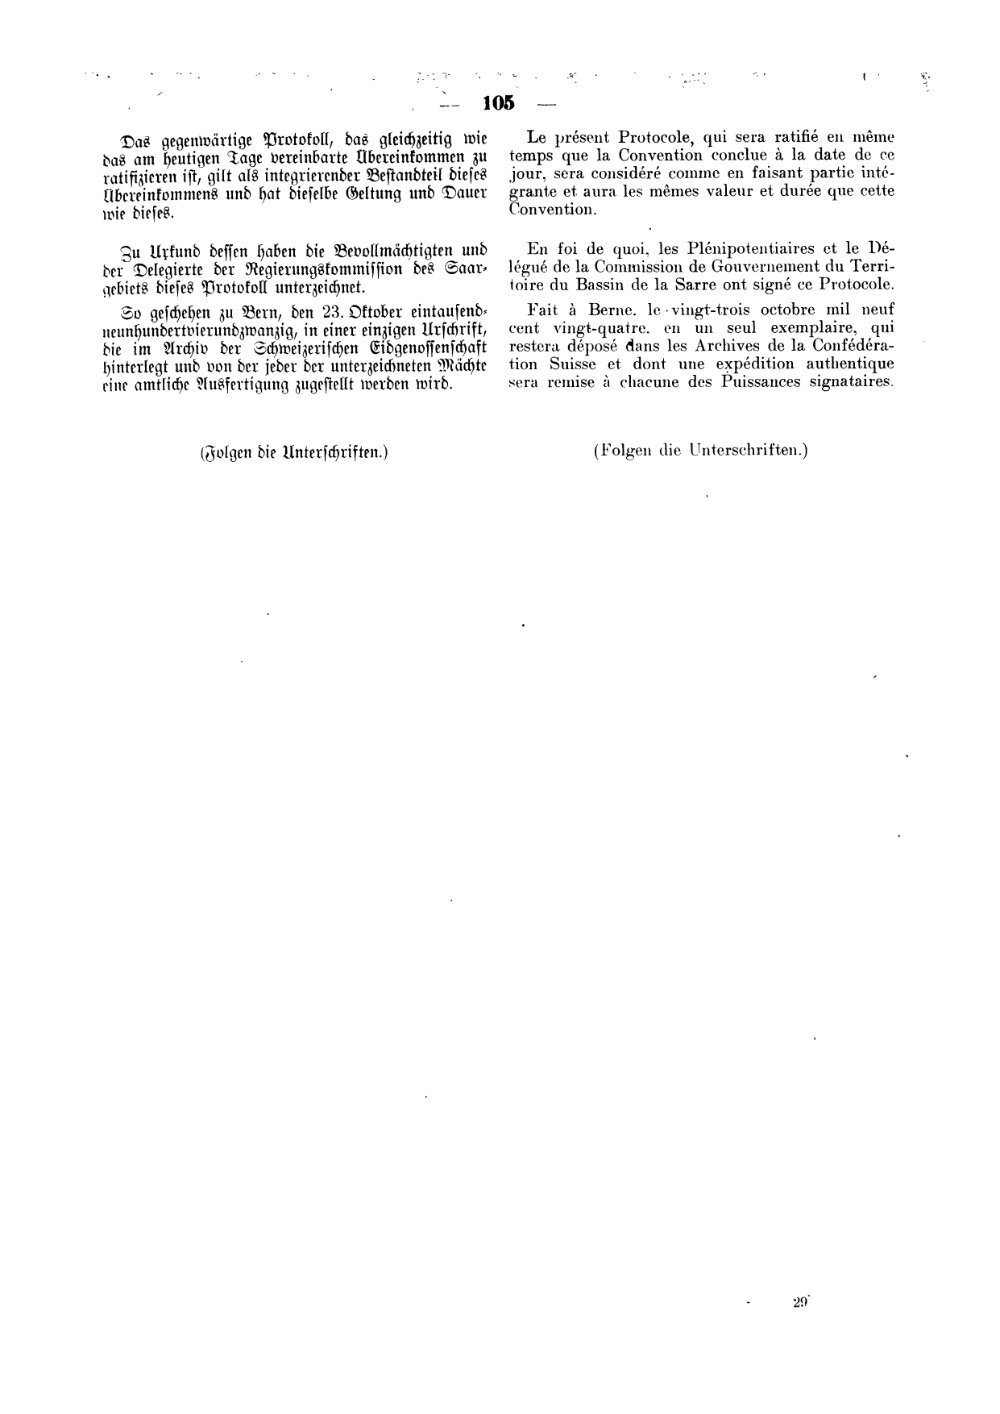 Scan of page 105